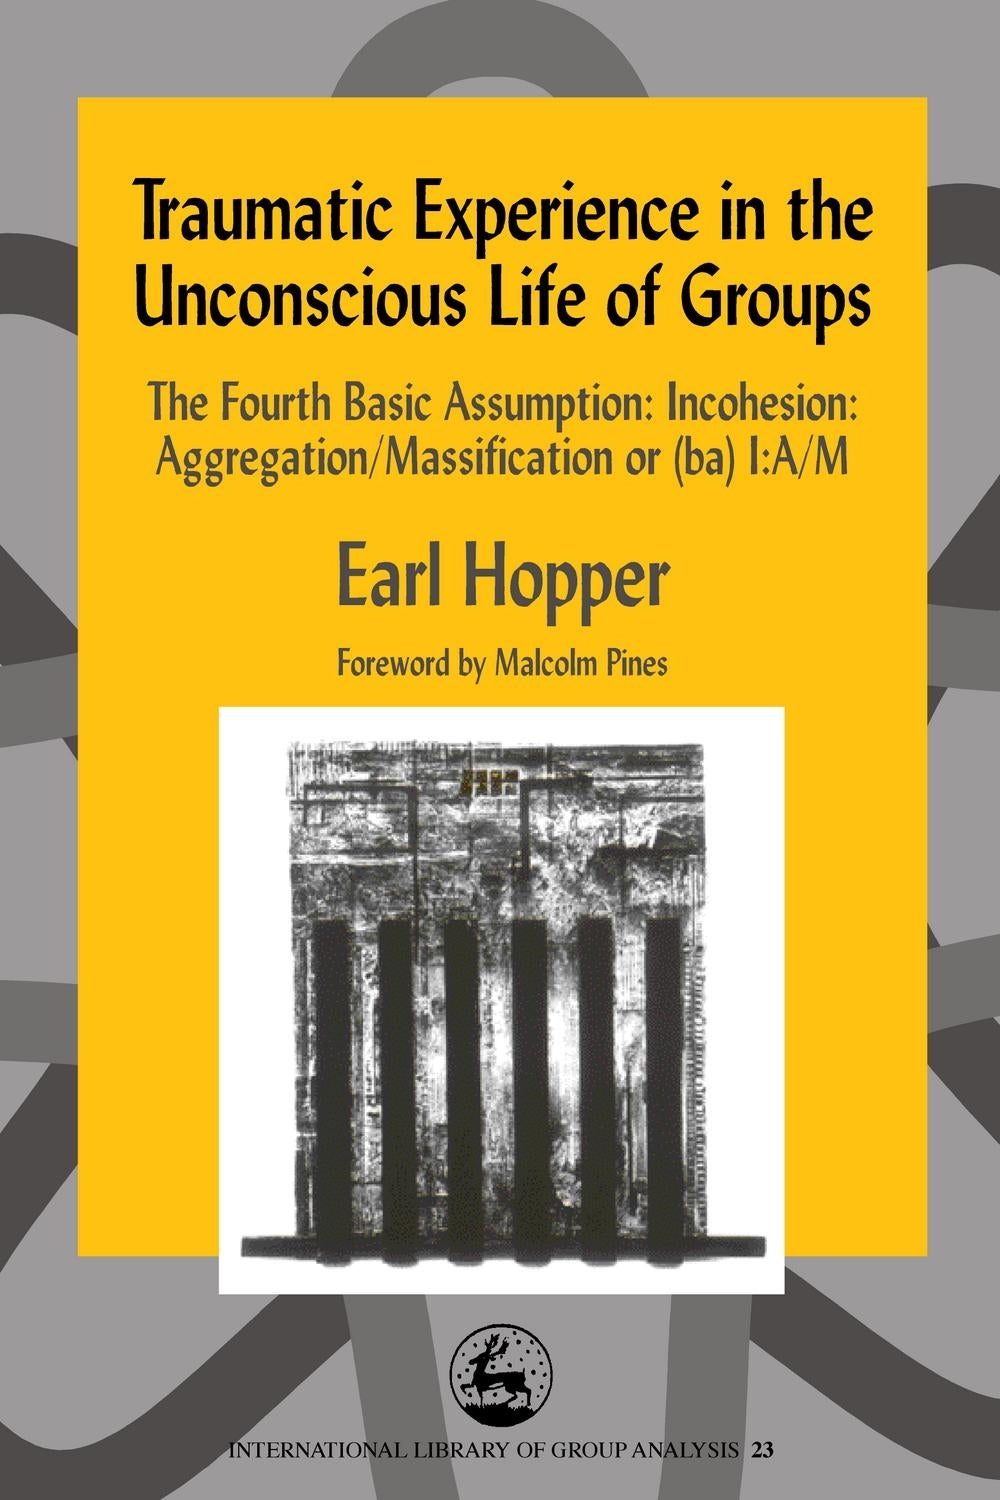 Traumatic Experience in the Unconscious Life of Groups by Earl Hopper, Malcolm Pines